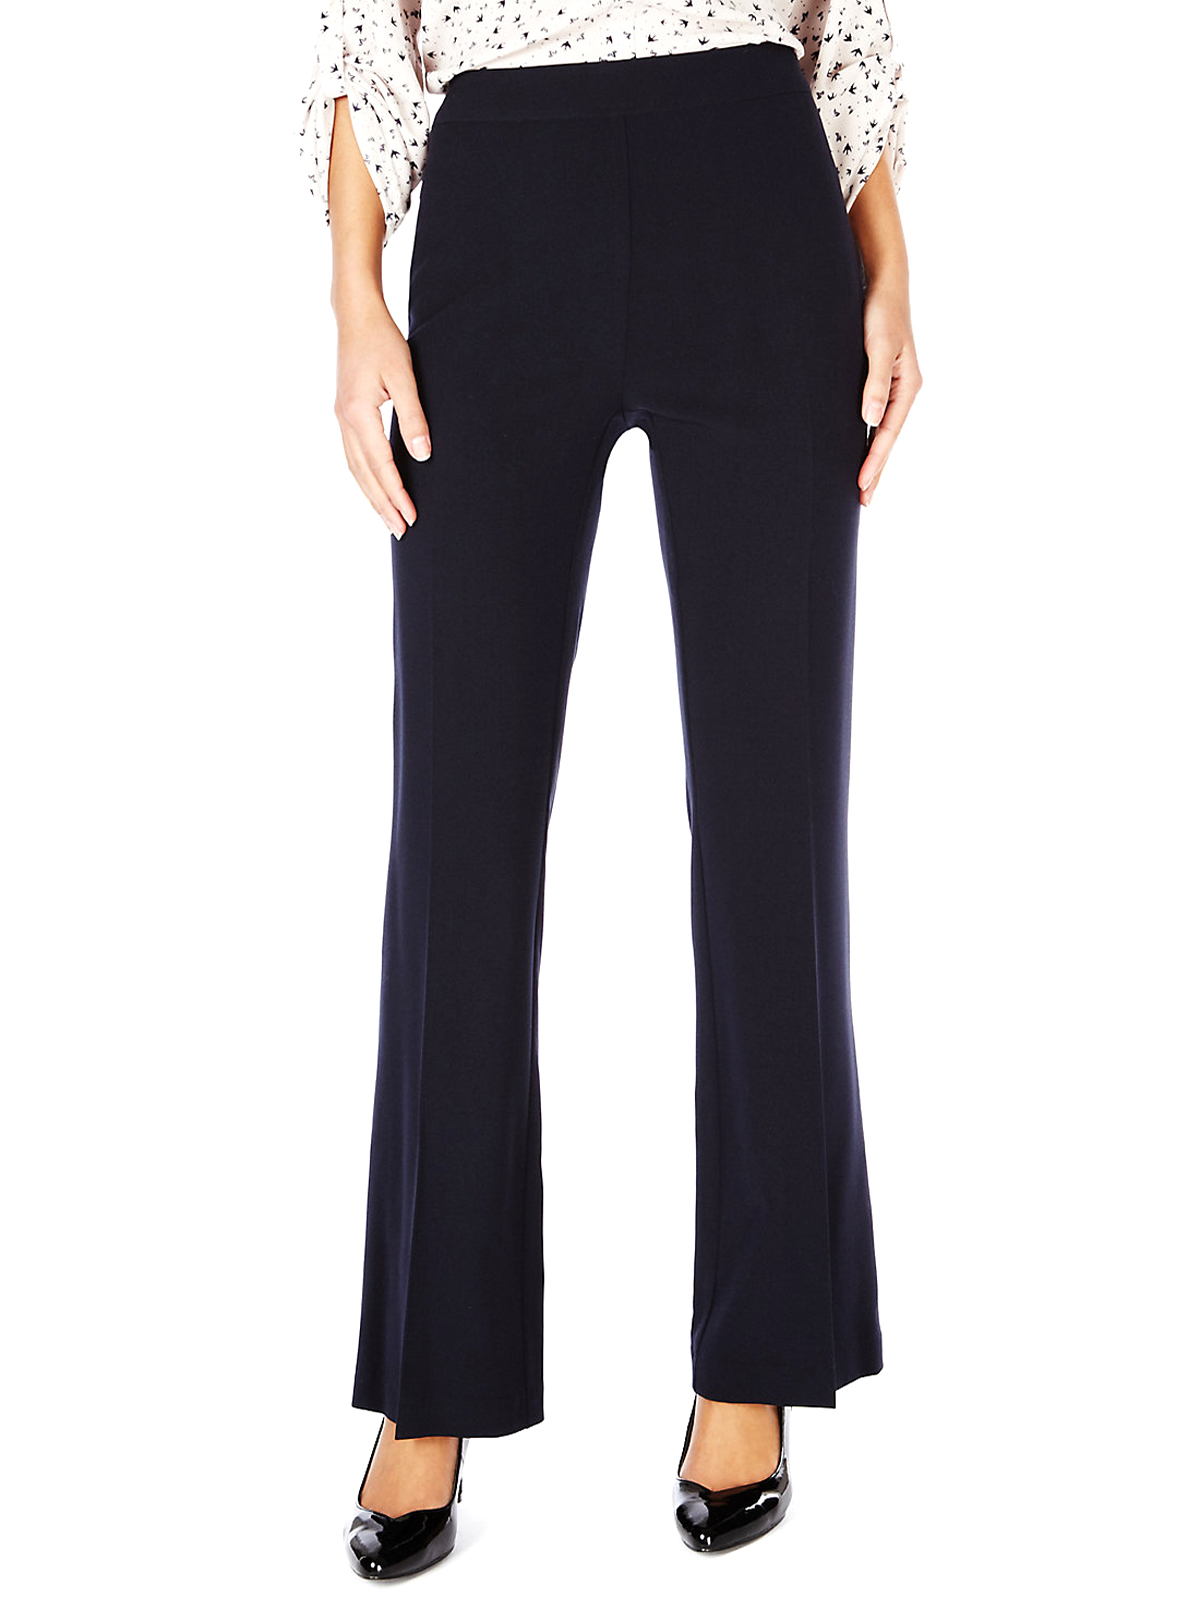 Marks and Spencer - - M&5 NAVY Flat Front Side Zip Flare Bootleg ...